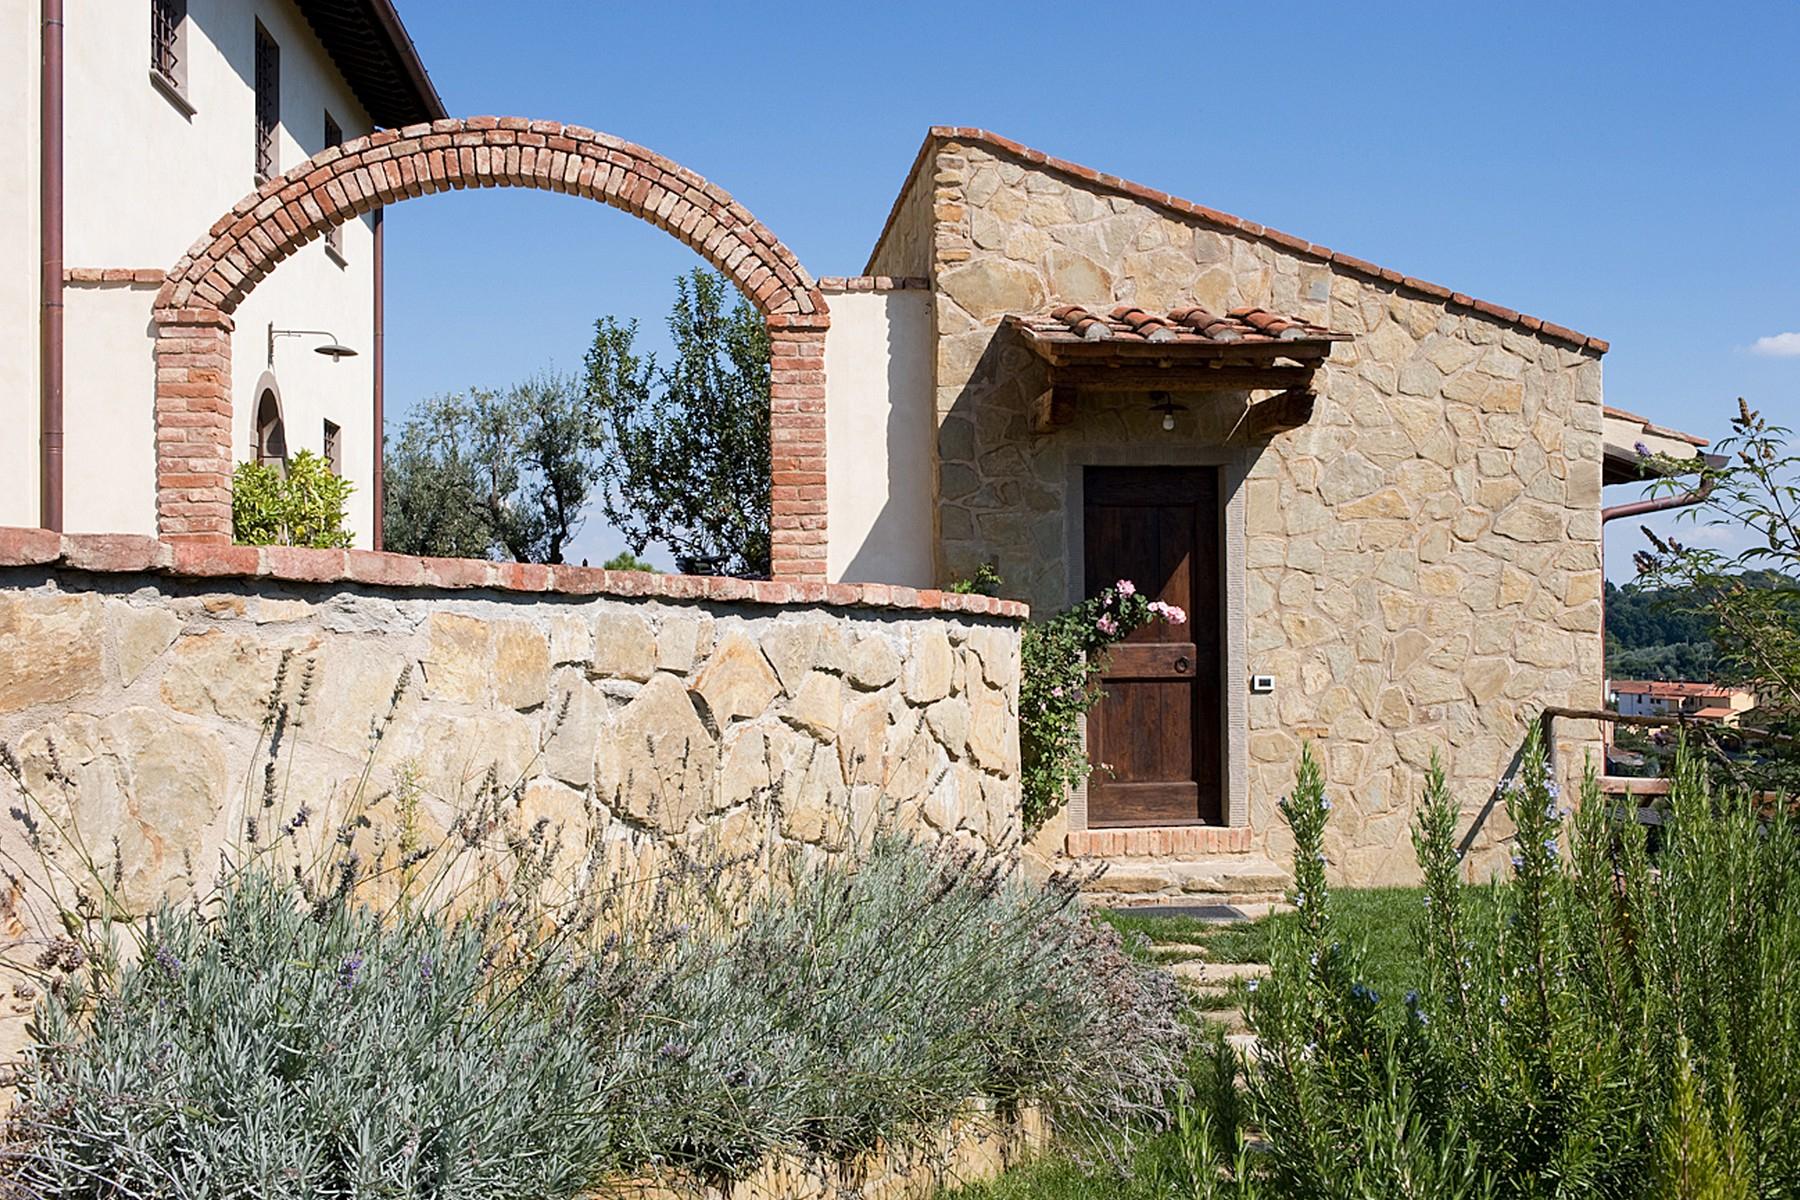 Farmhouse for sale in the Tuscan hills - 4